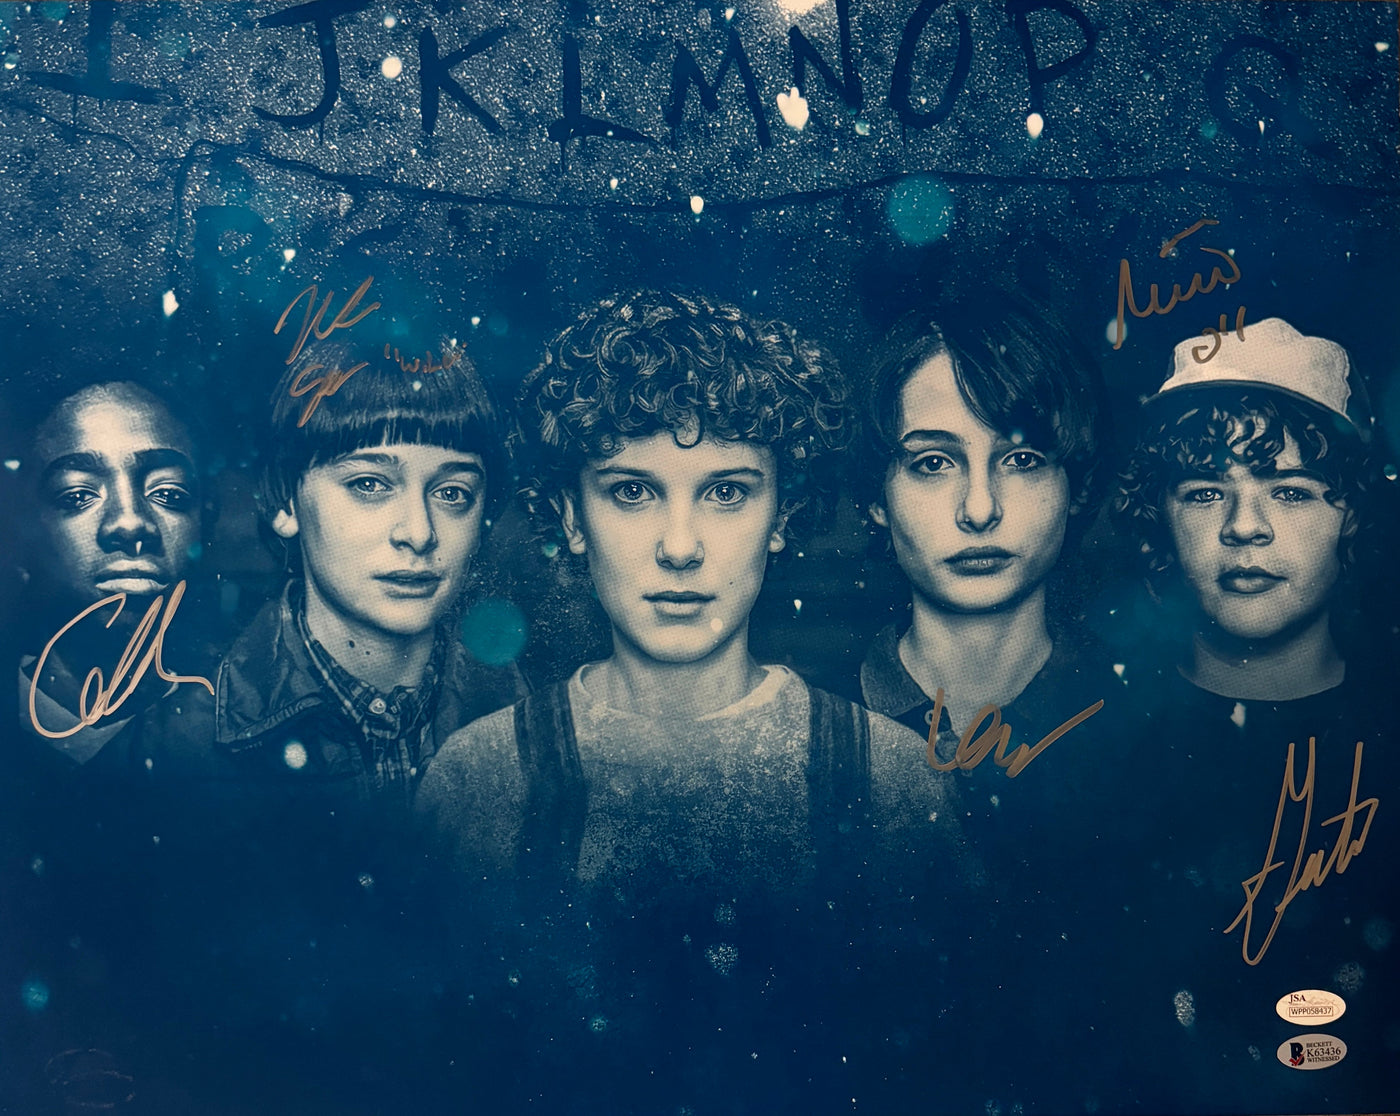 Stranger Things Cast Autographed 16x20 Photo Eleven Dustin Mike Will and Lucas JSA 3